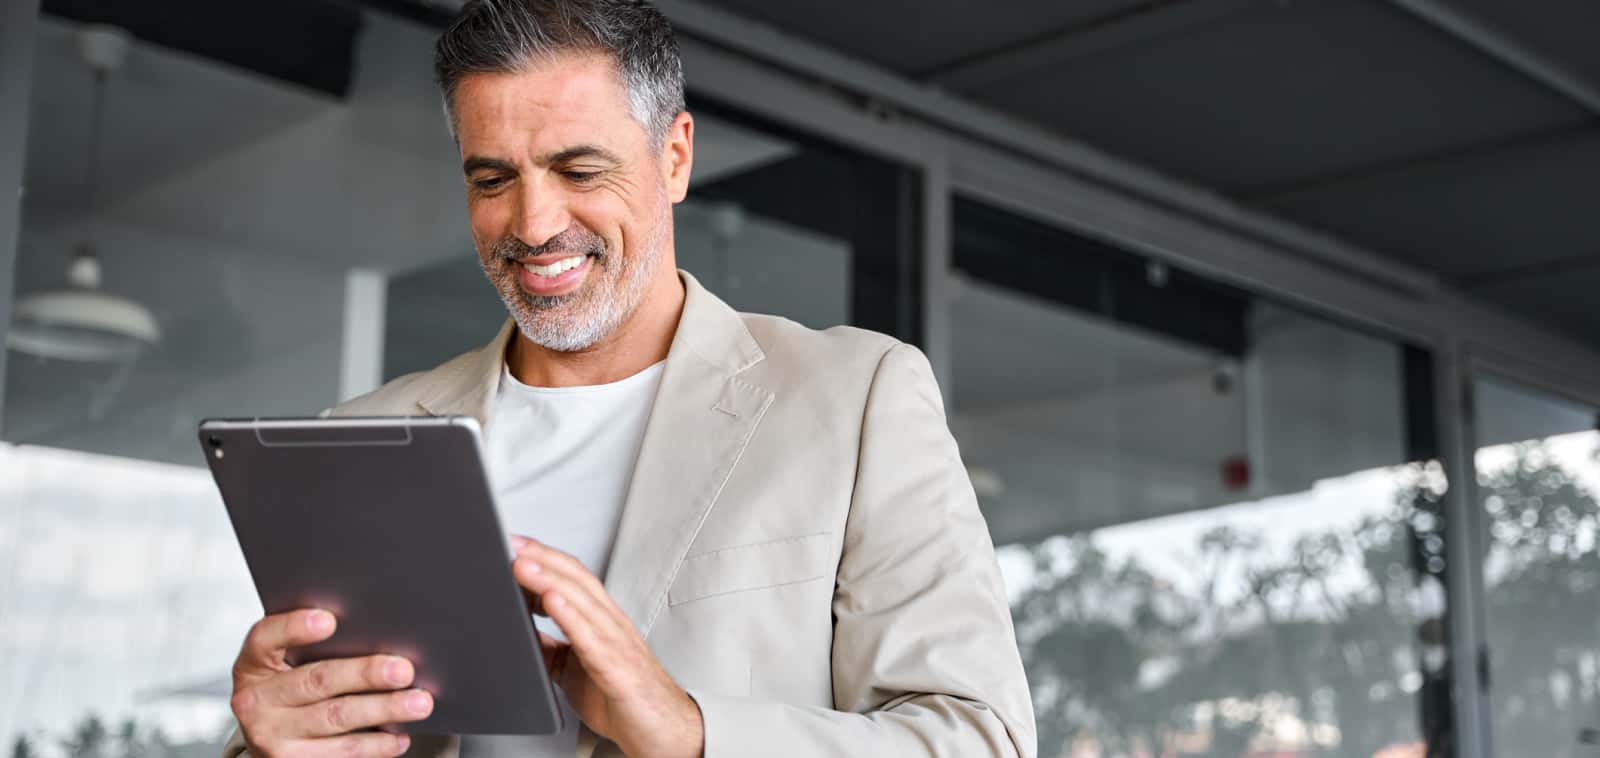 Man smiling and holding a tablet. 